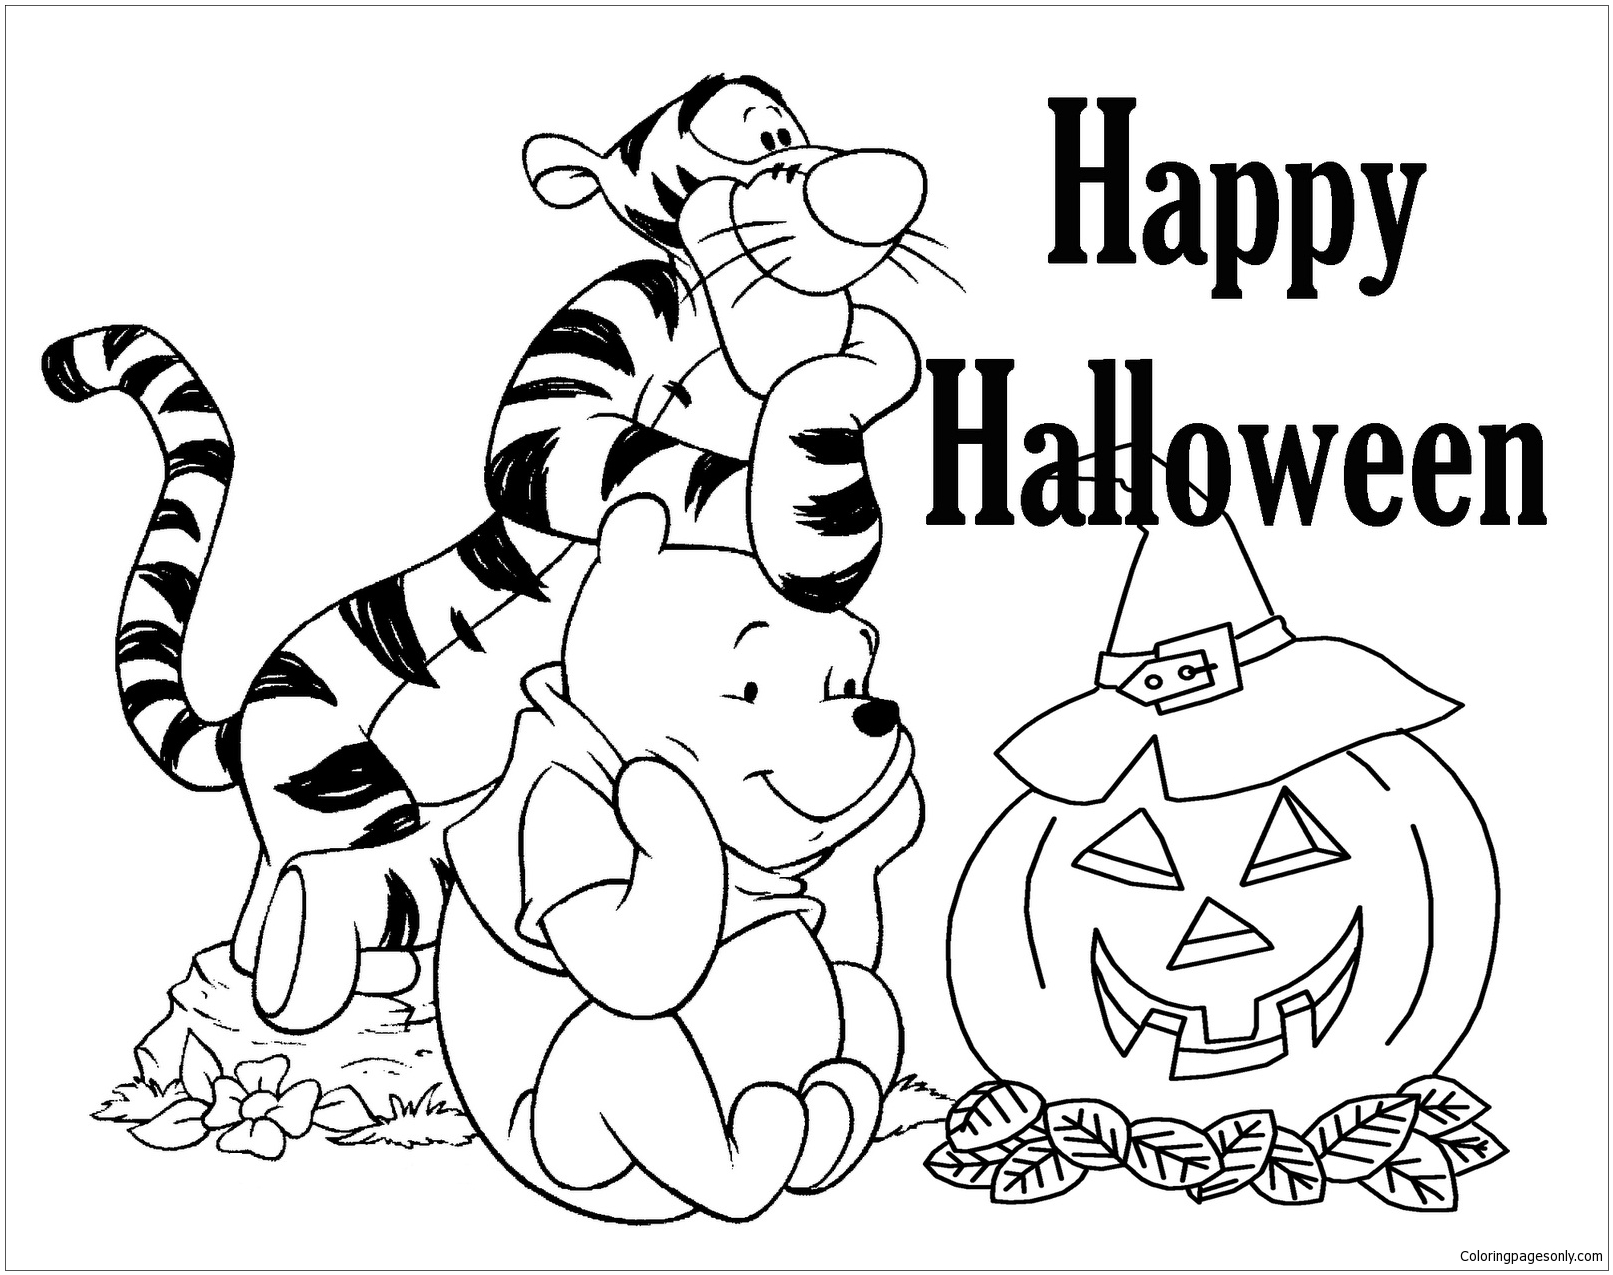 Happy Halloween 5 Coloring Pages